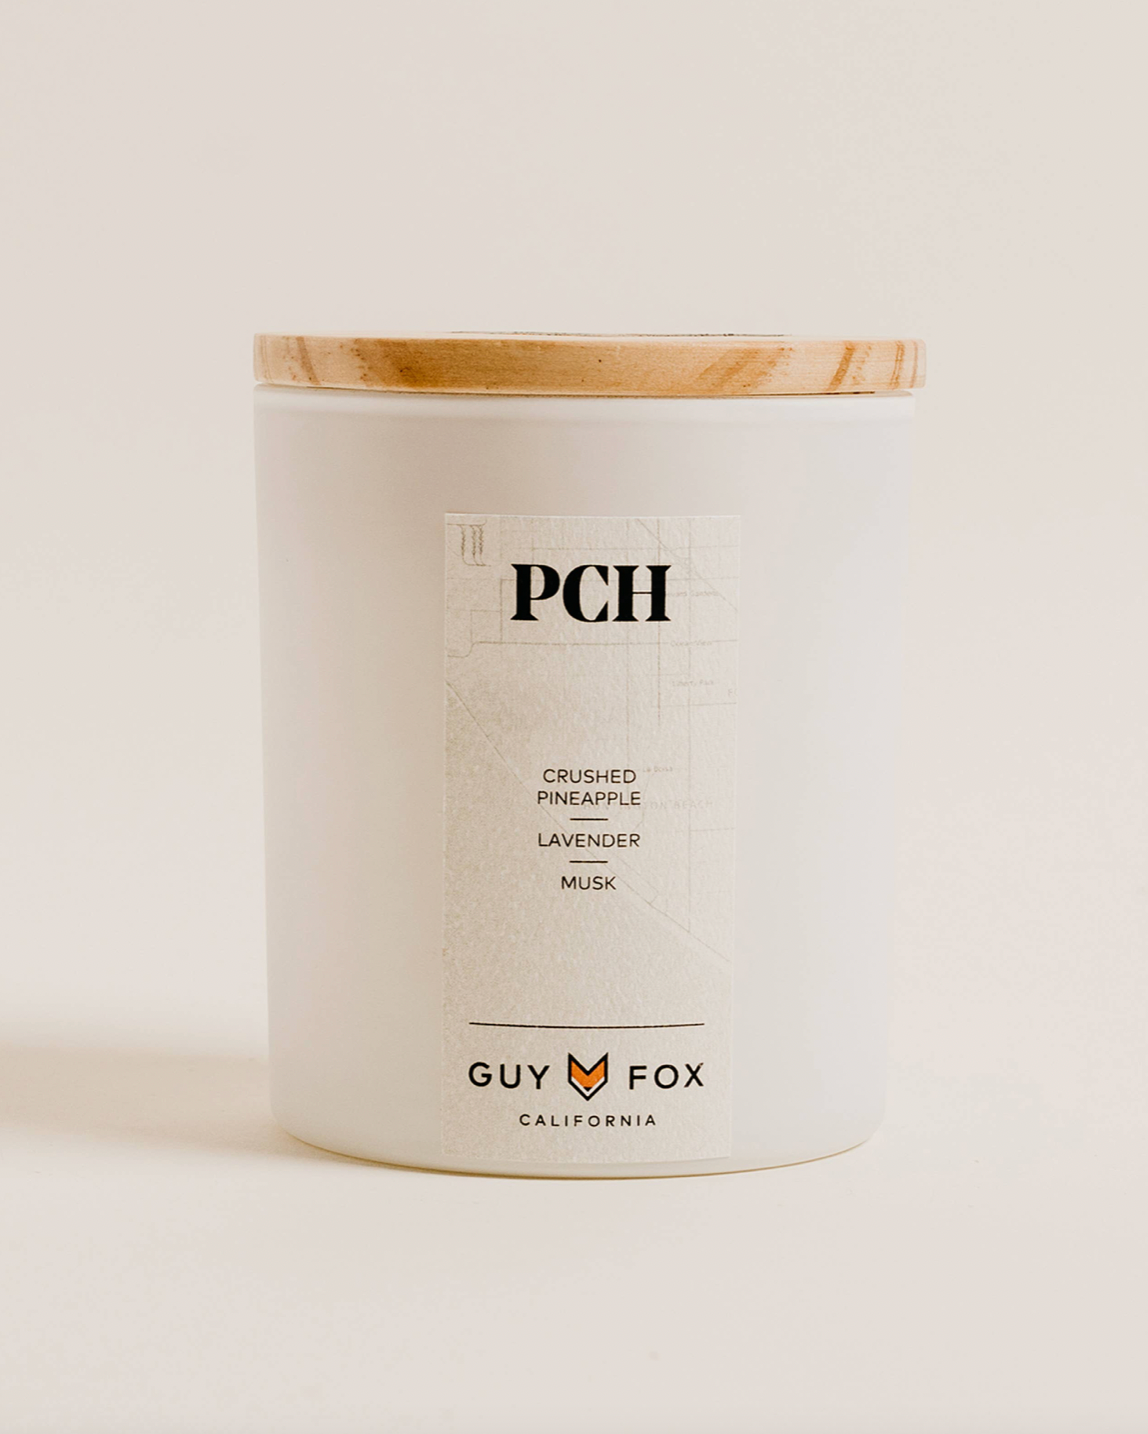 Guy Fox Candle - PCH